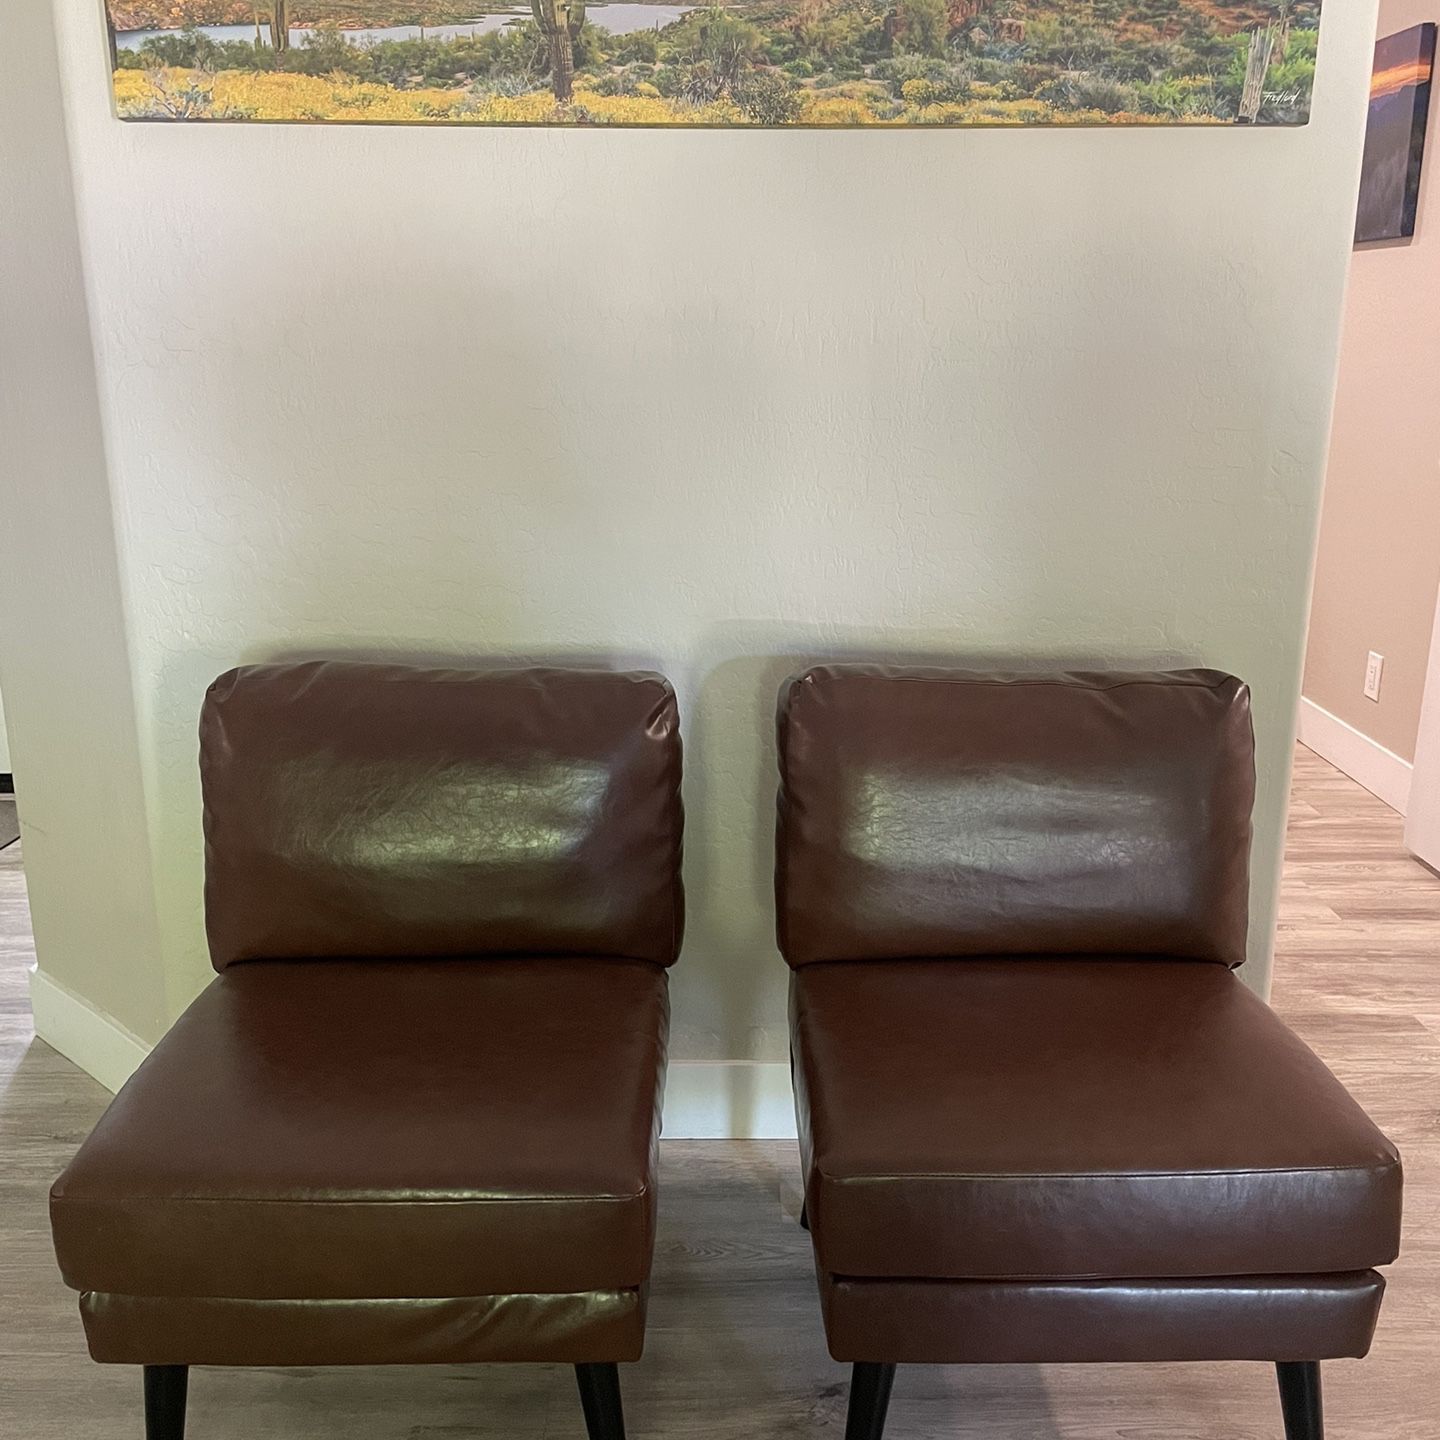 2 Leather Look Matching Chairs  50ea 